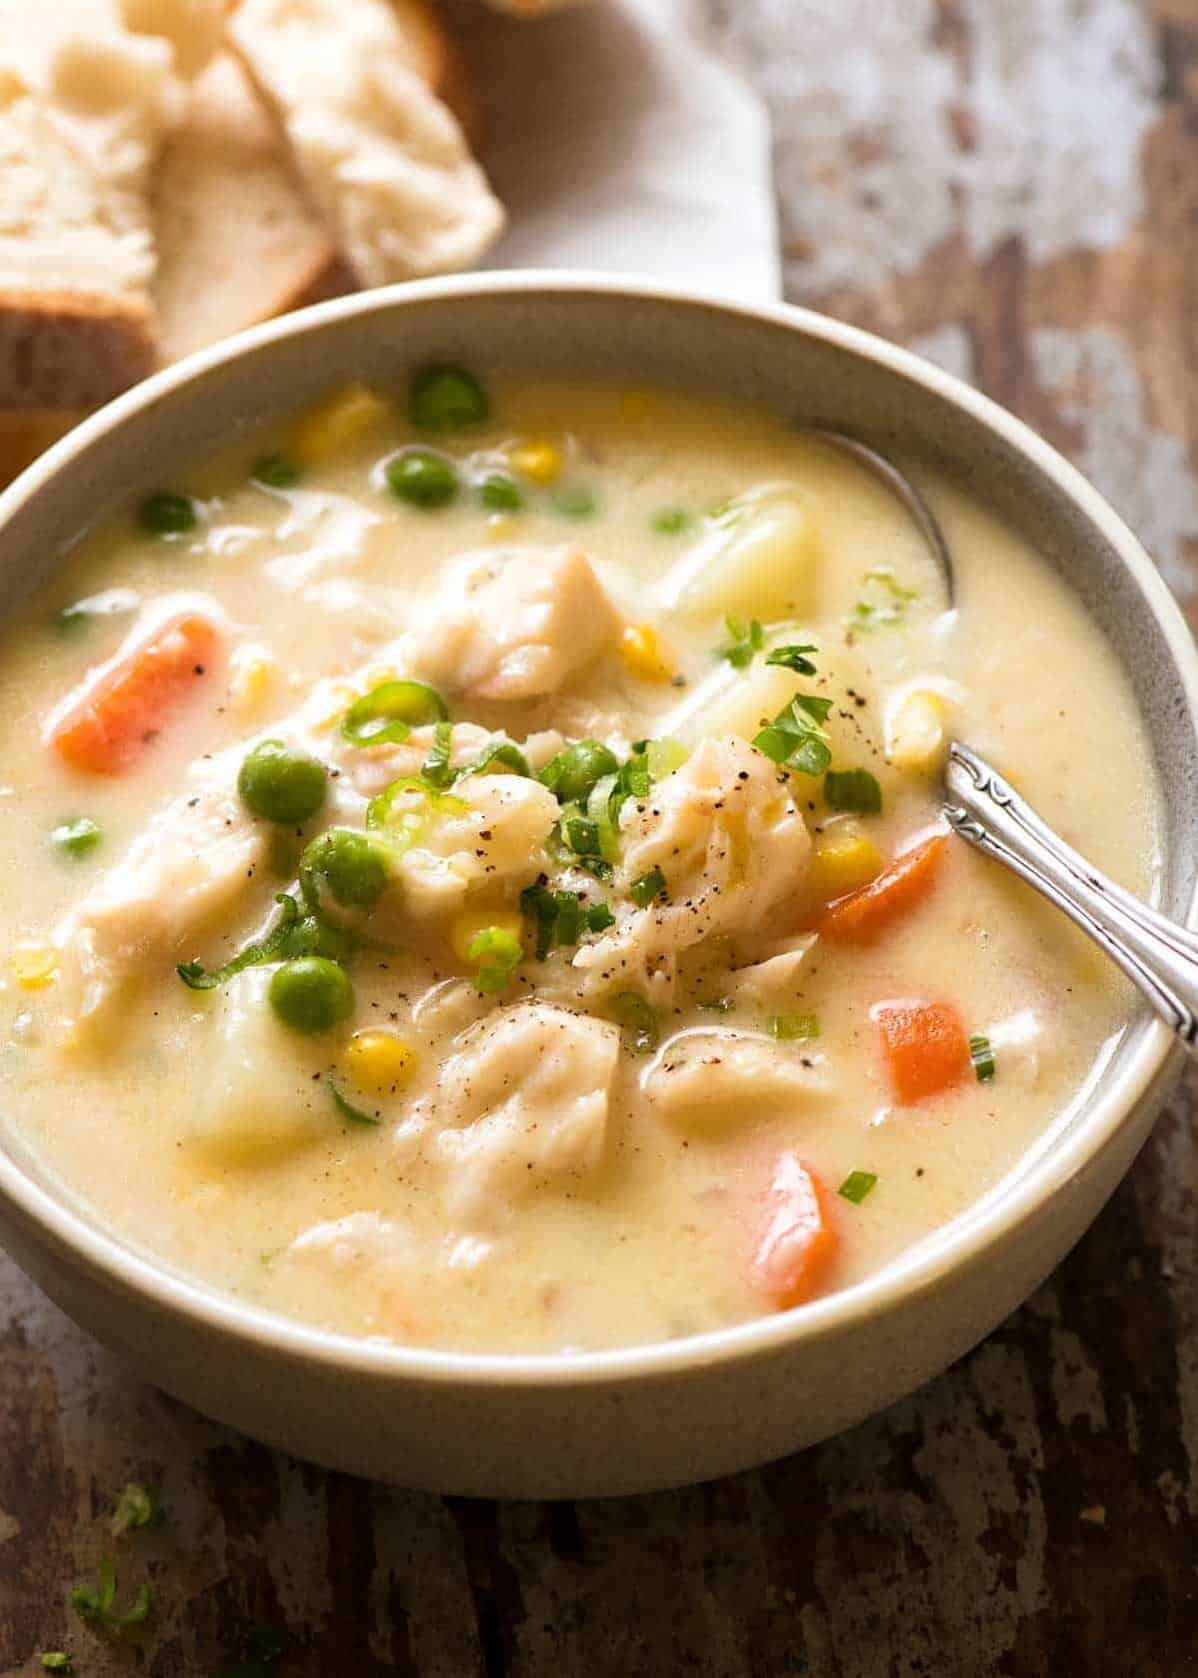  Dive into a sea of flavors with this hearty fish chowder